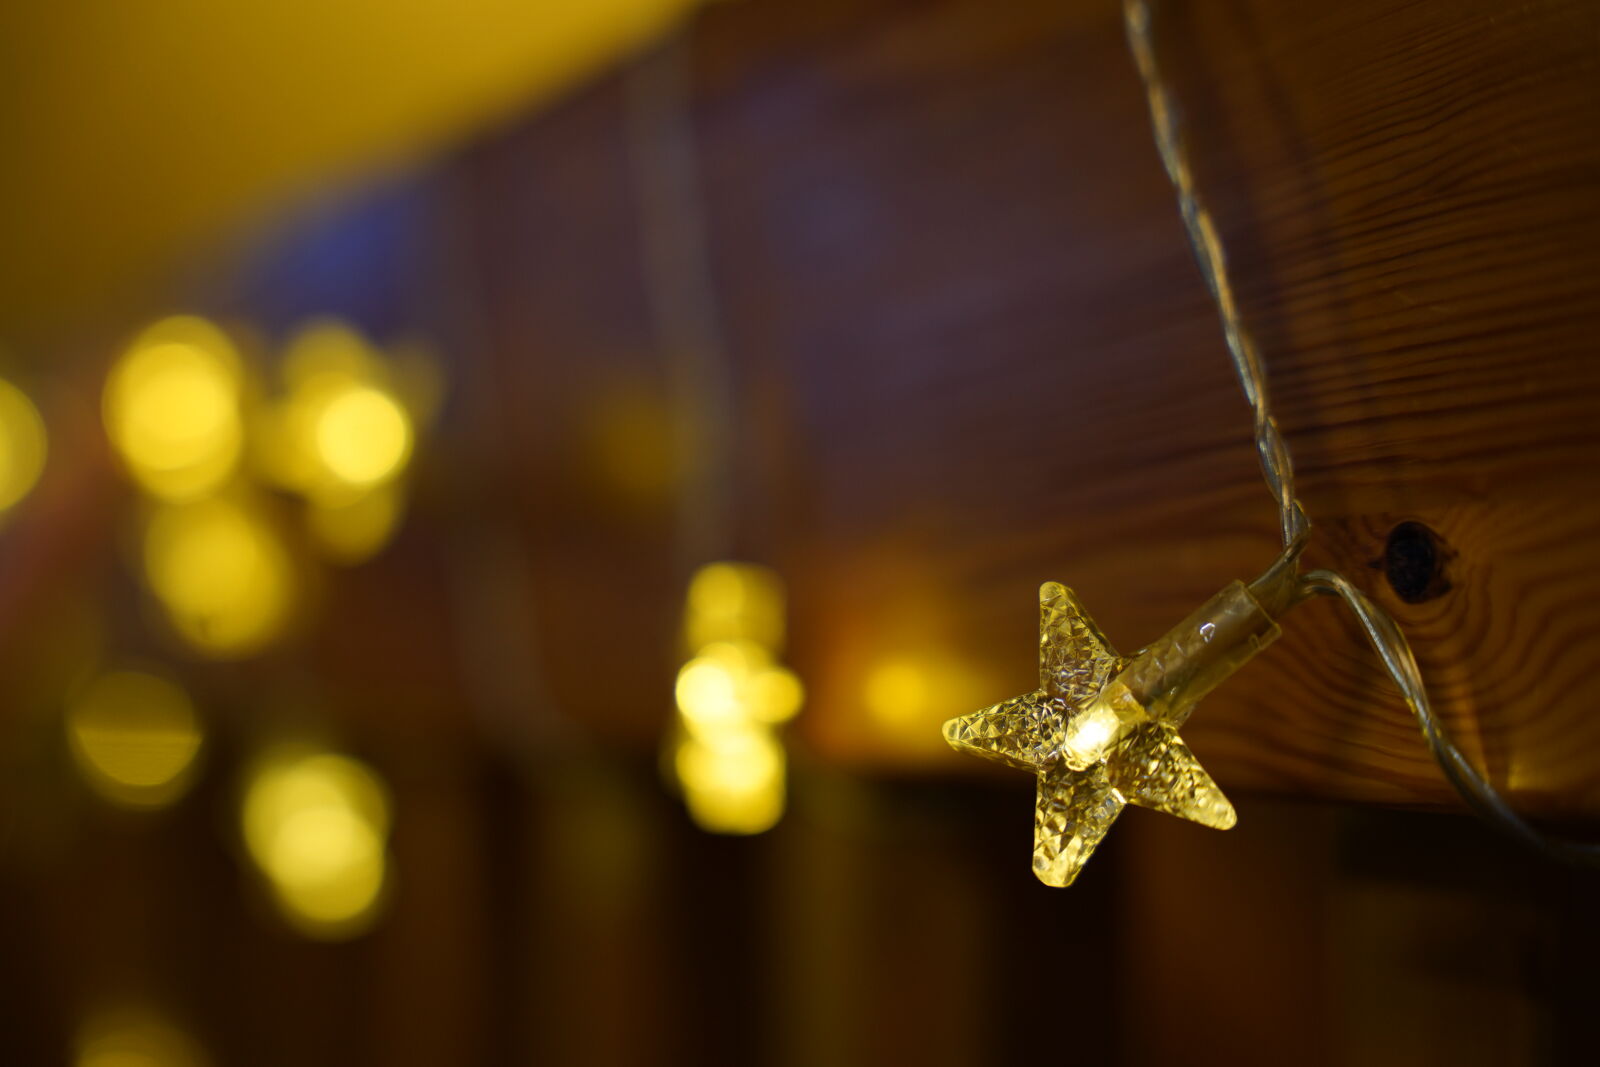 Sigma 24-70mm F2.8 DG DN Art sample photo. Even more christmas decoration photography